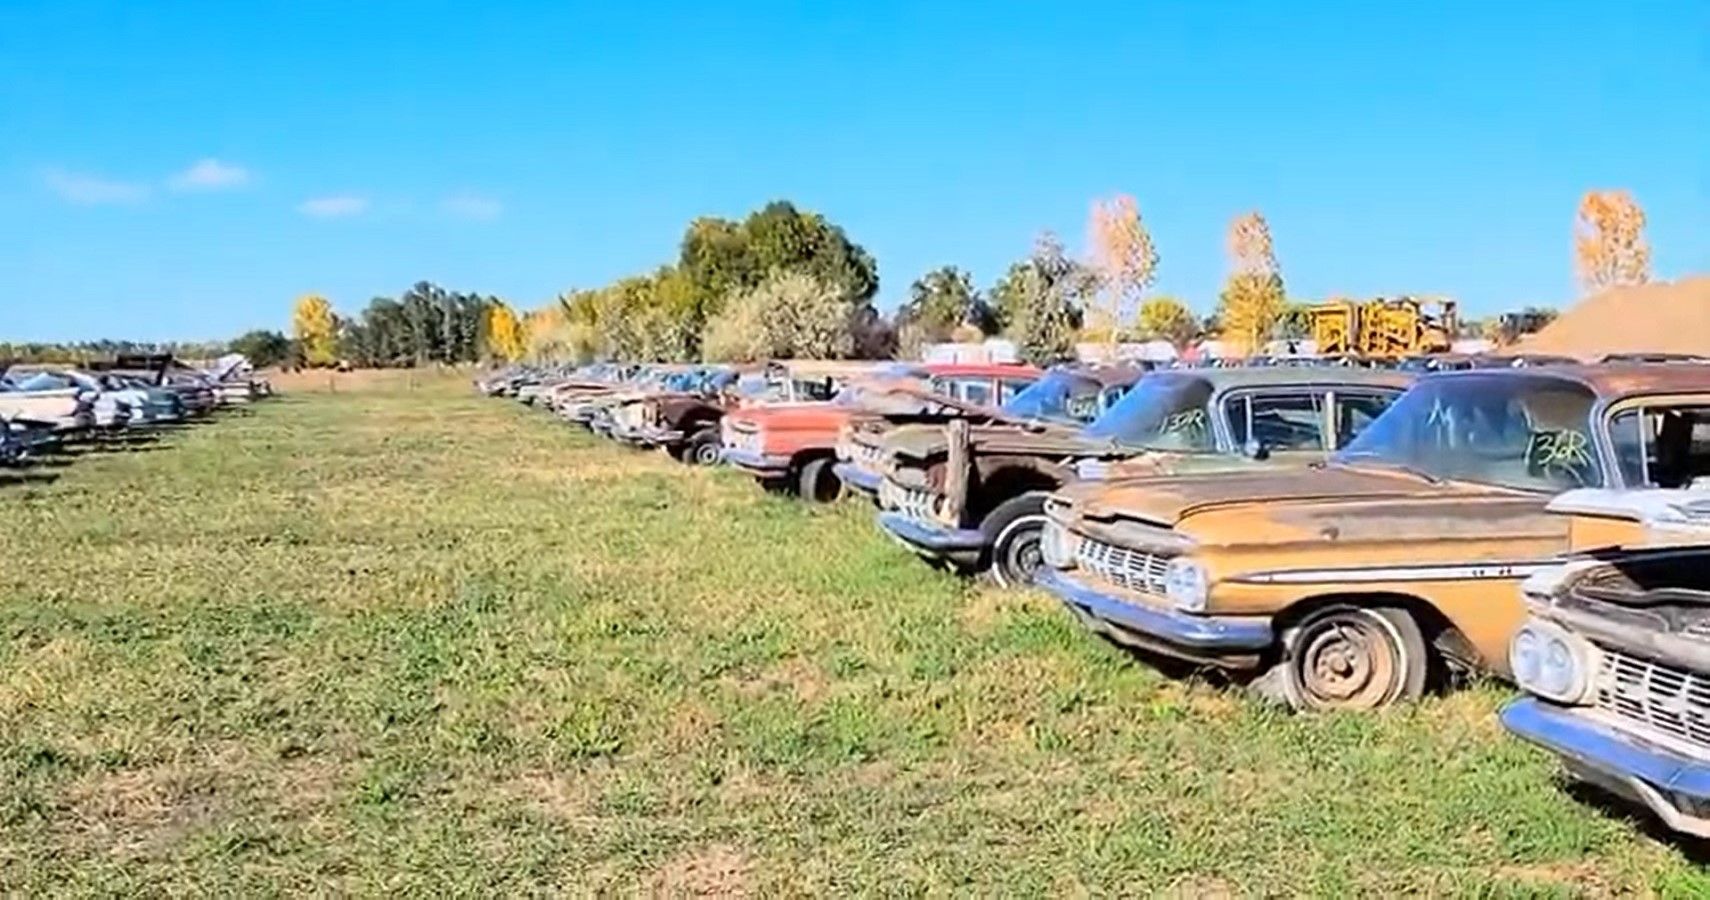 Check Out This Massive Abandoned Collection Of Classic Cars